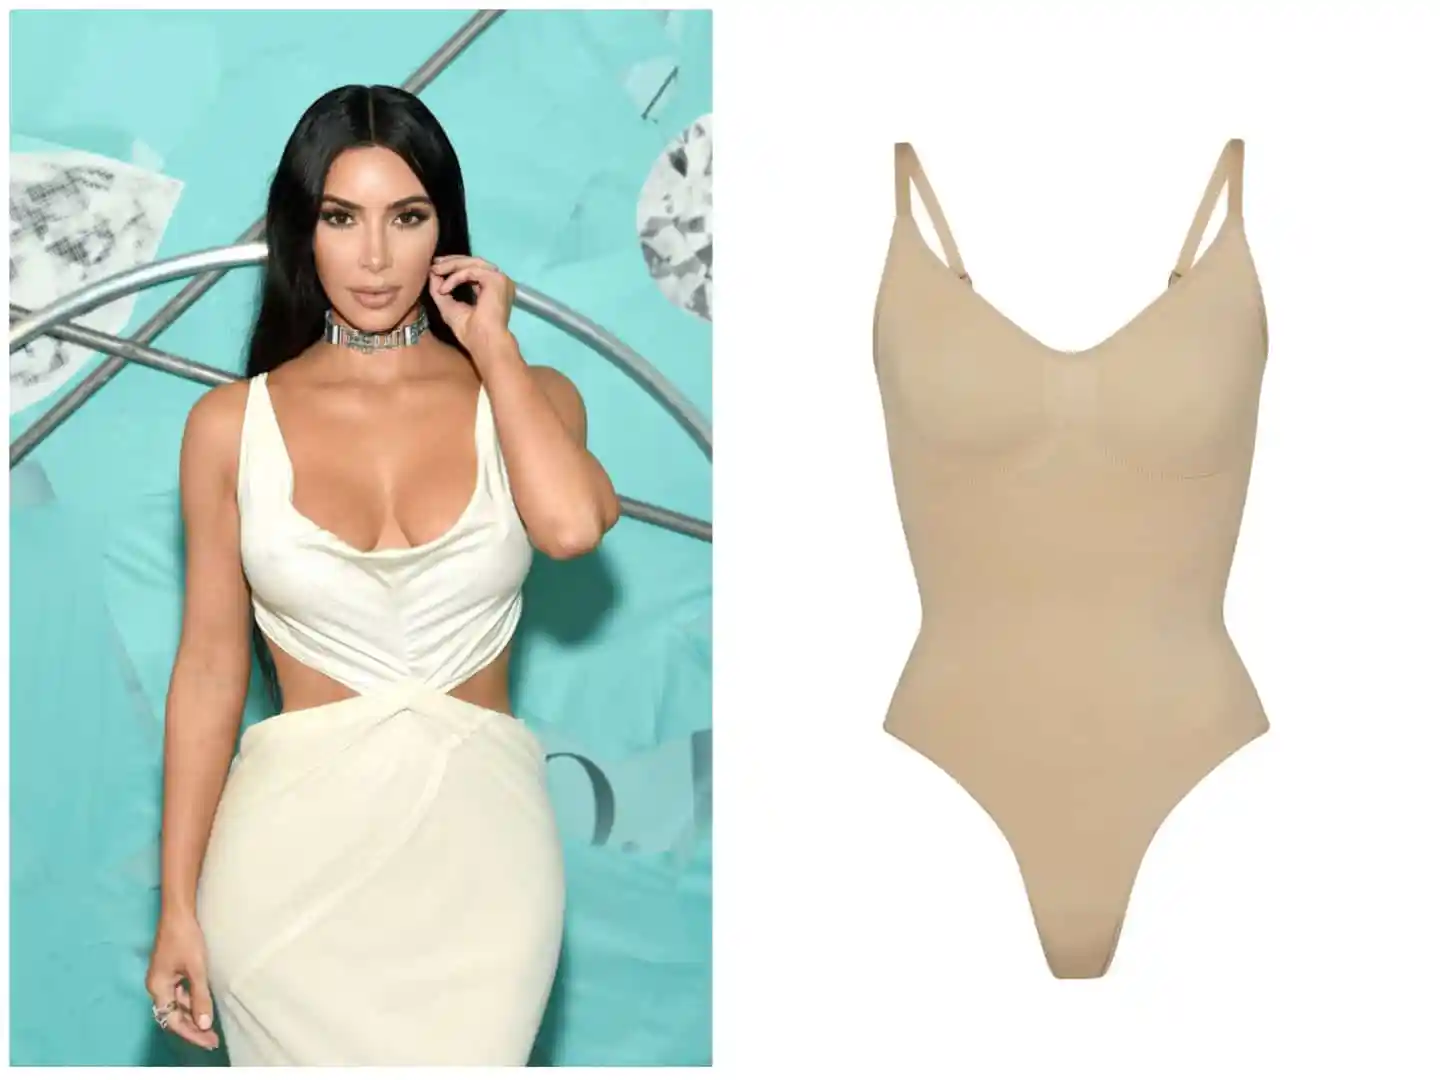 Kim Kardashian’s Skims is changing its popular bodysuit to be more size-inclusive